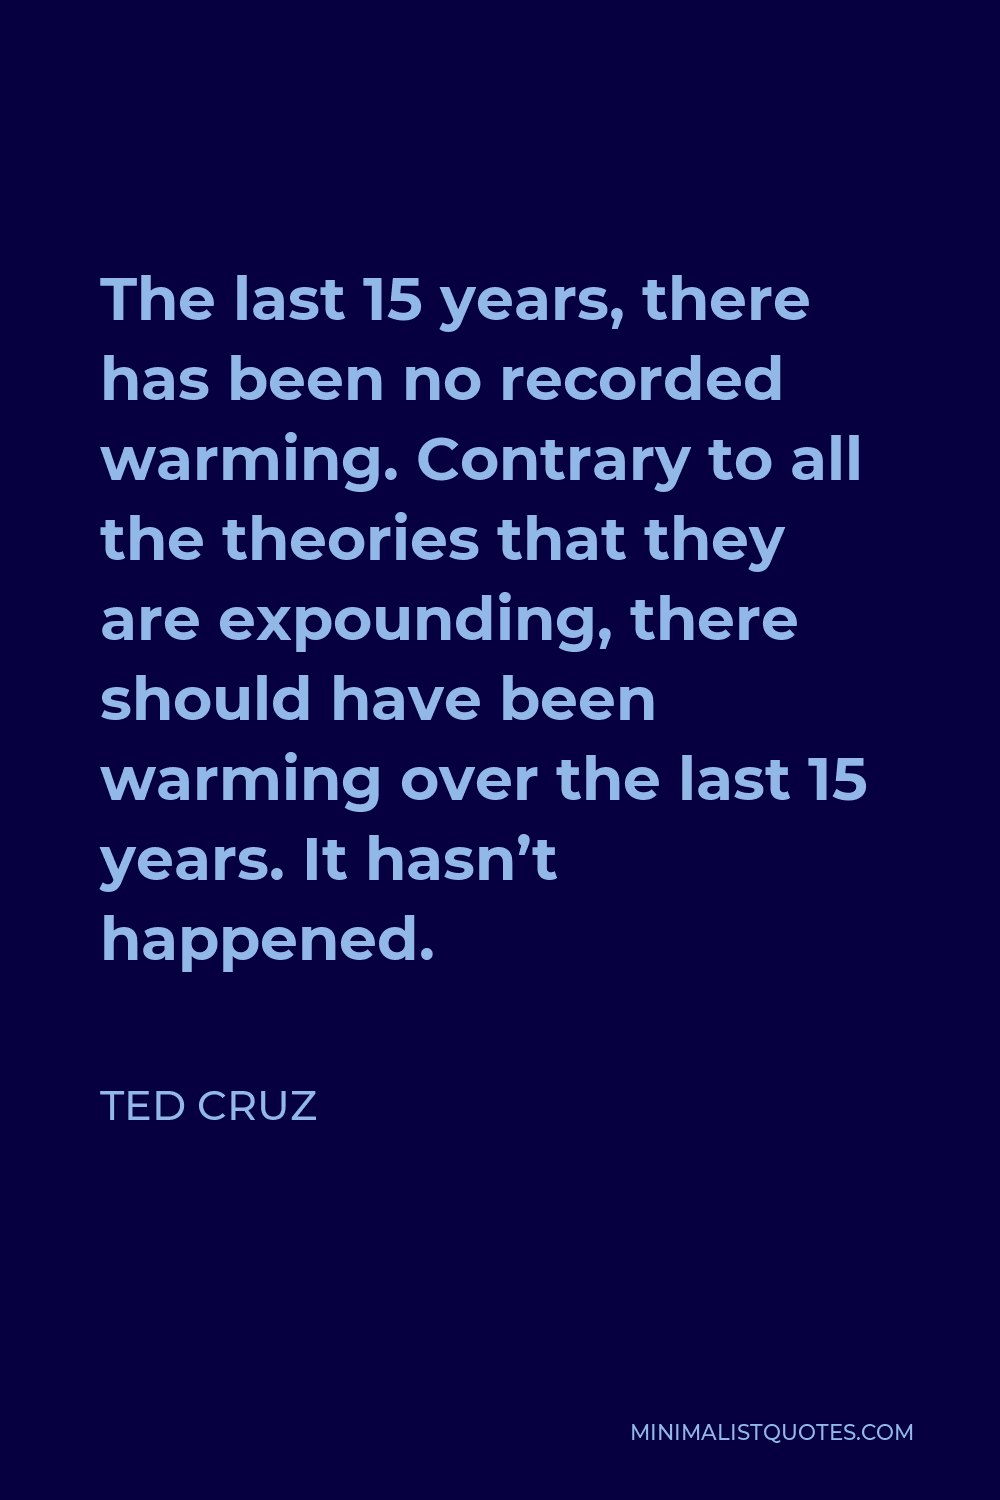 Ted Cruz Quote - The last 15 years, there has been no recorded warming. Contrary to all the theories that they are expounding, there should have been warming over the last 15 years. It hasn’t happened.